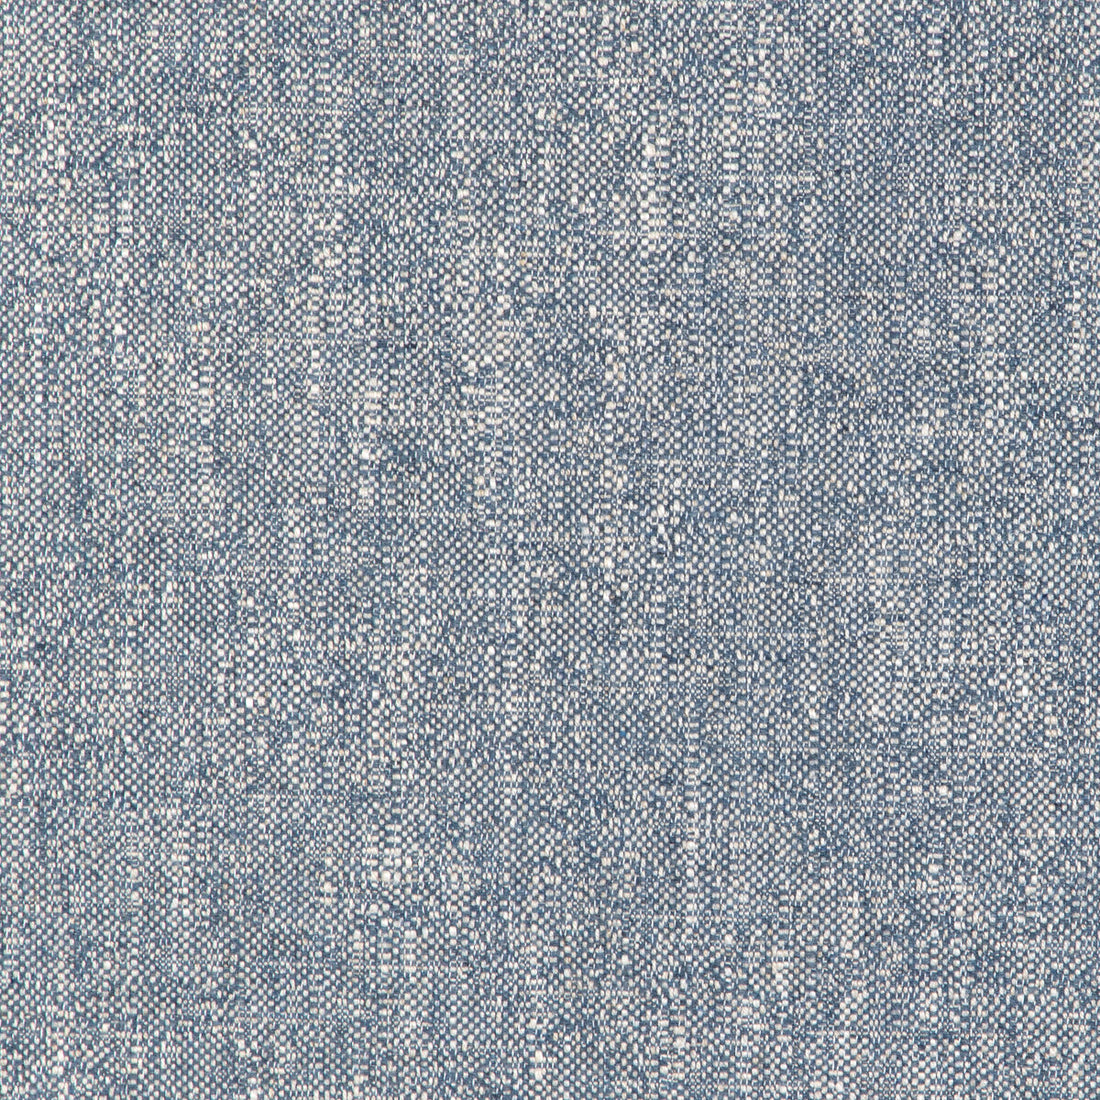 Kravet Design fabric in 36968-516 color - pattern 36968.516.0 - by Kravet Design in the Sustainable Textures II collection